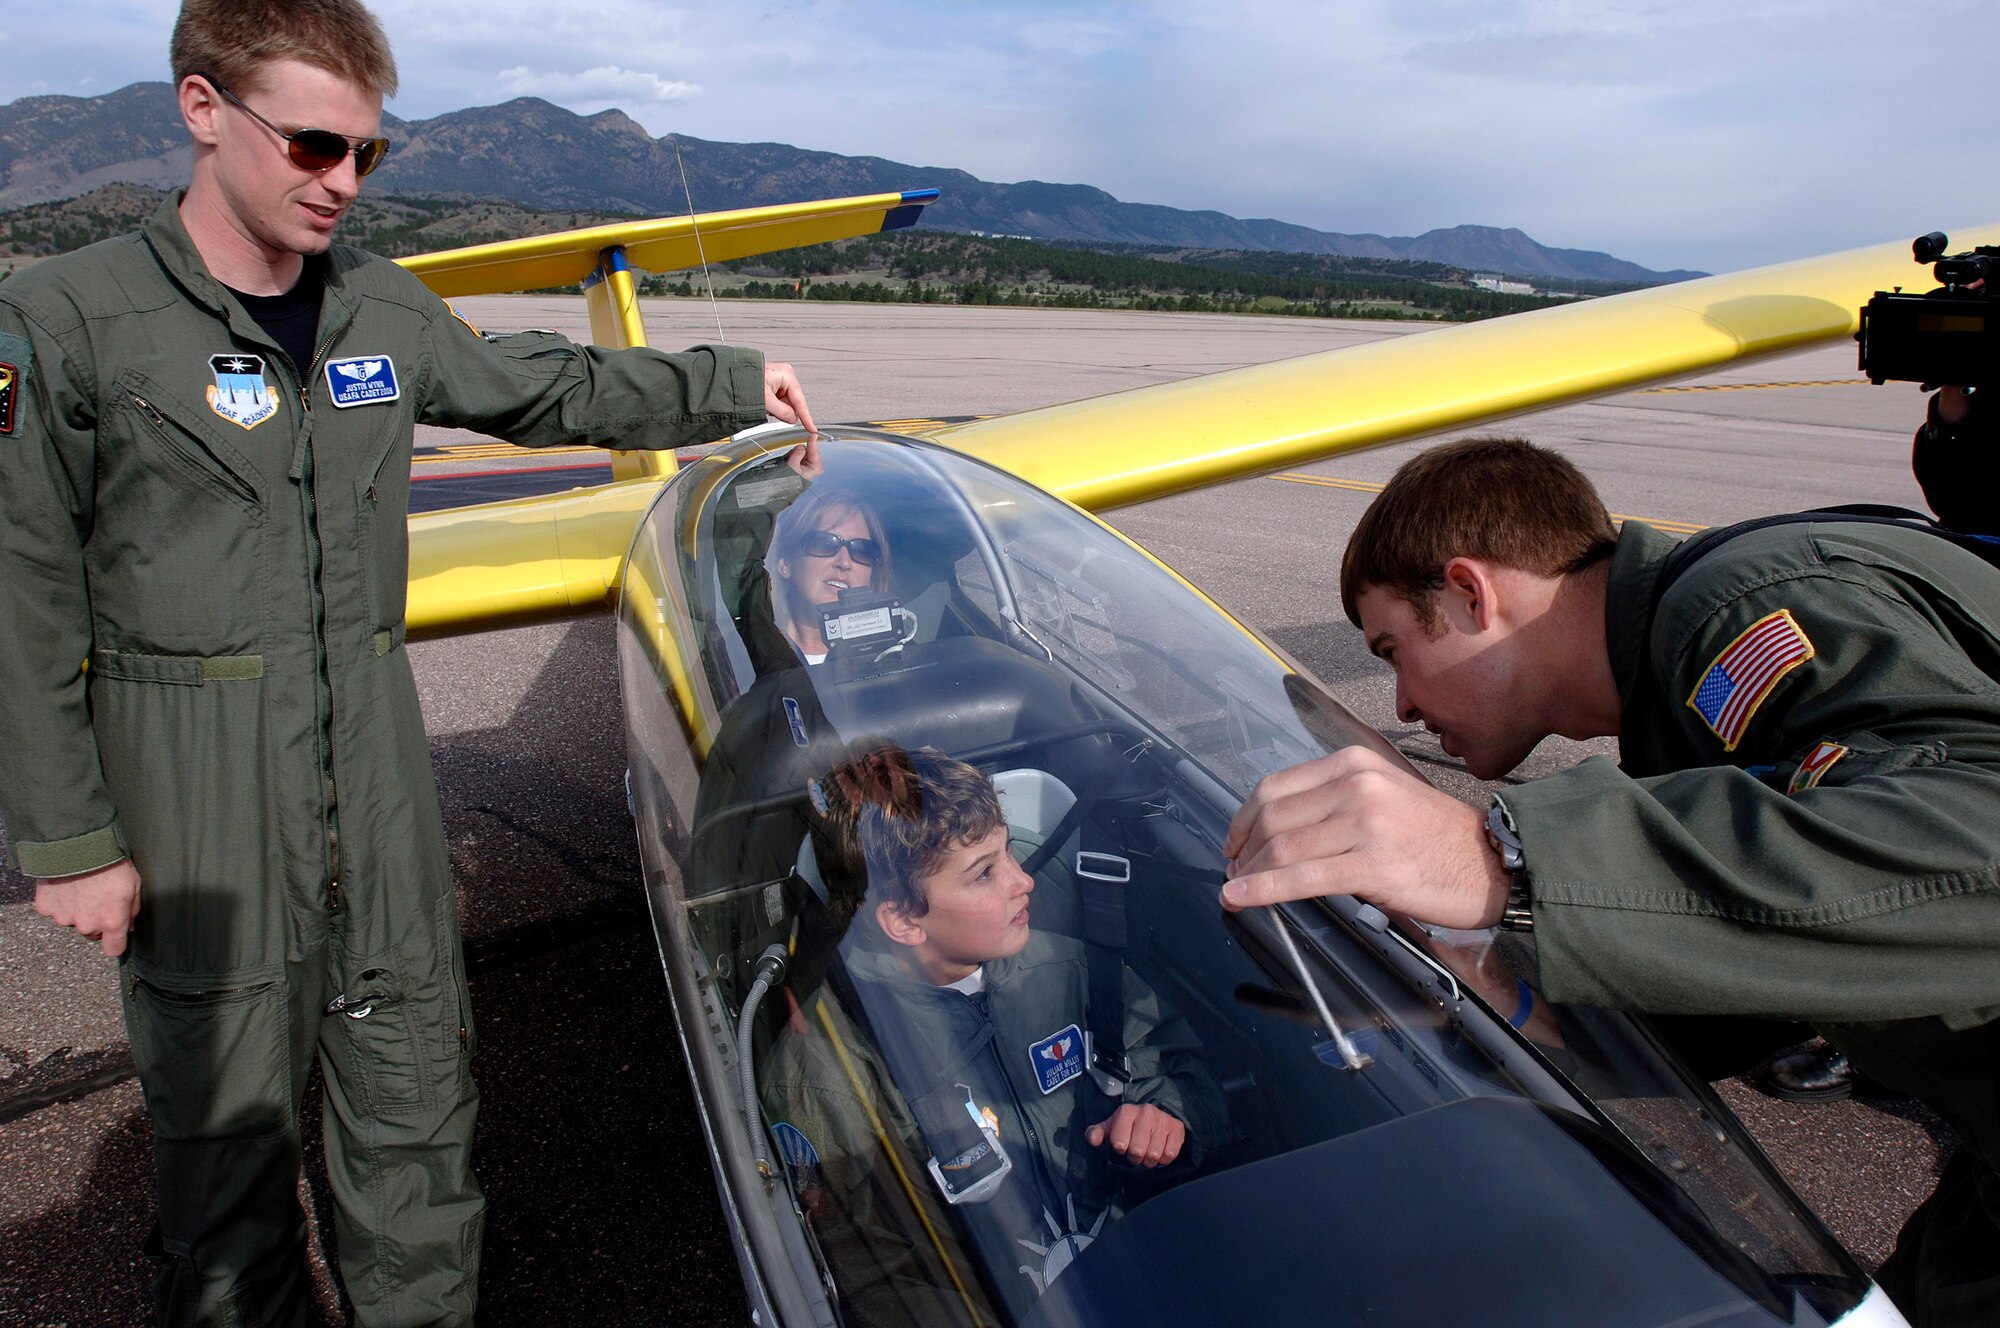 Sophomore cadets Justin Wynn and Erik Gonsalves talk to 10-year-old Julian Willis and his mom JoAnne Willis about an Academy glider on the flightline at the U.S Air Force Academy, Colo. The Make-a-Wish Foundation and the Air Force Academy made Julian a "Cadet for a Day". Cadets have sponsored 22 children since the program started in 2000. (U.S. Air Force photo/Mike Kaplan)